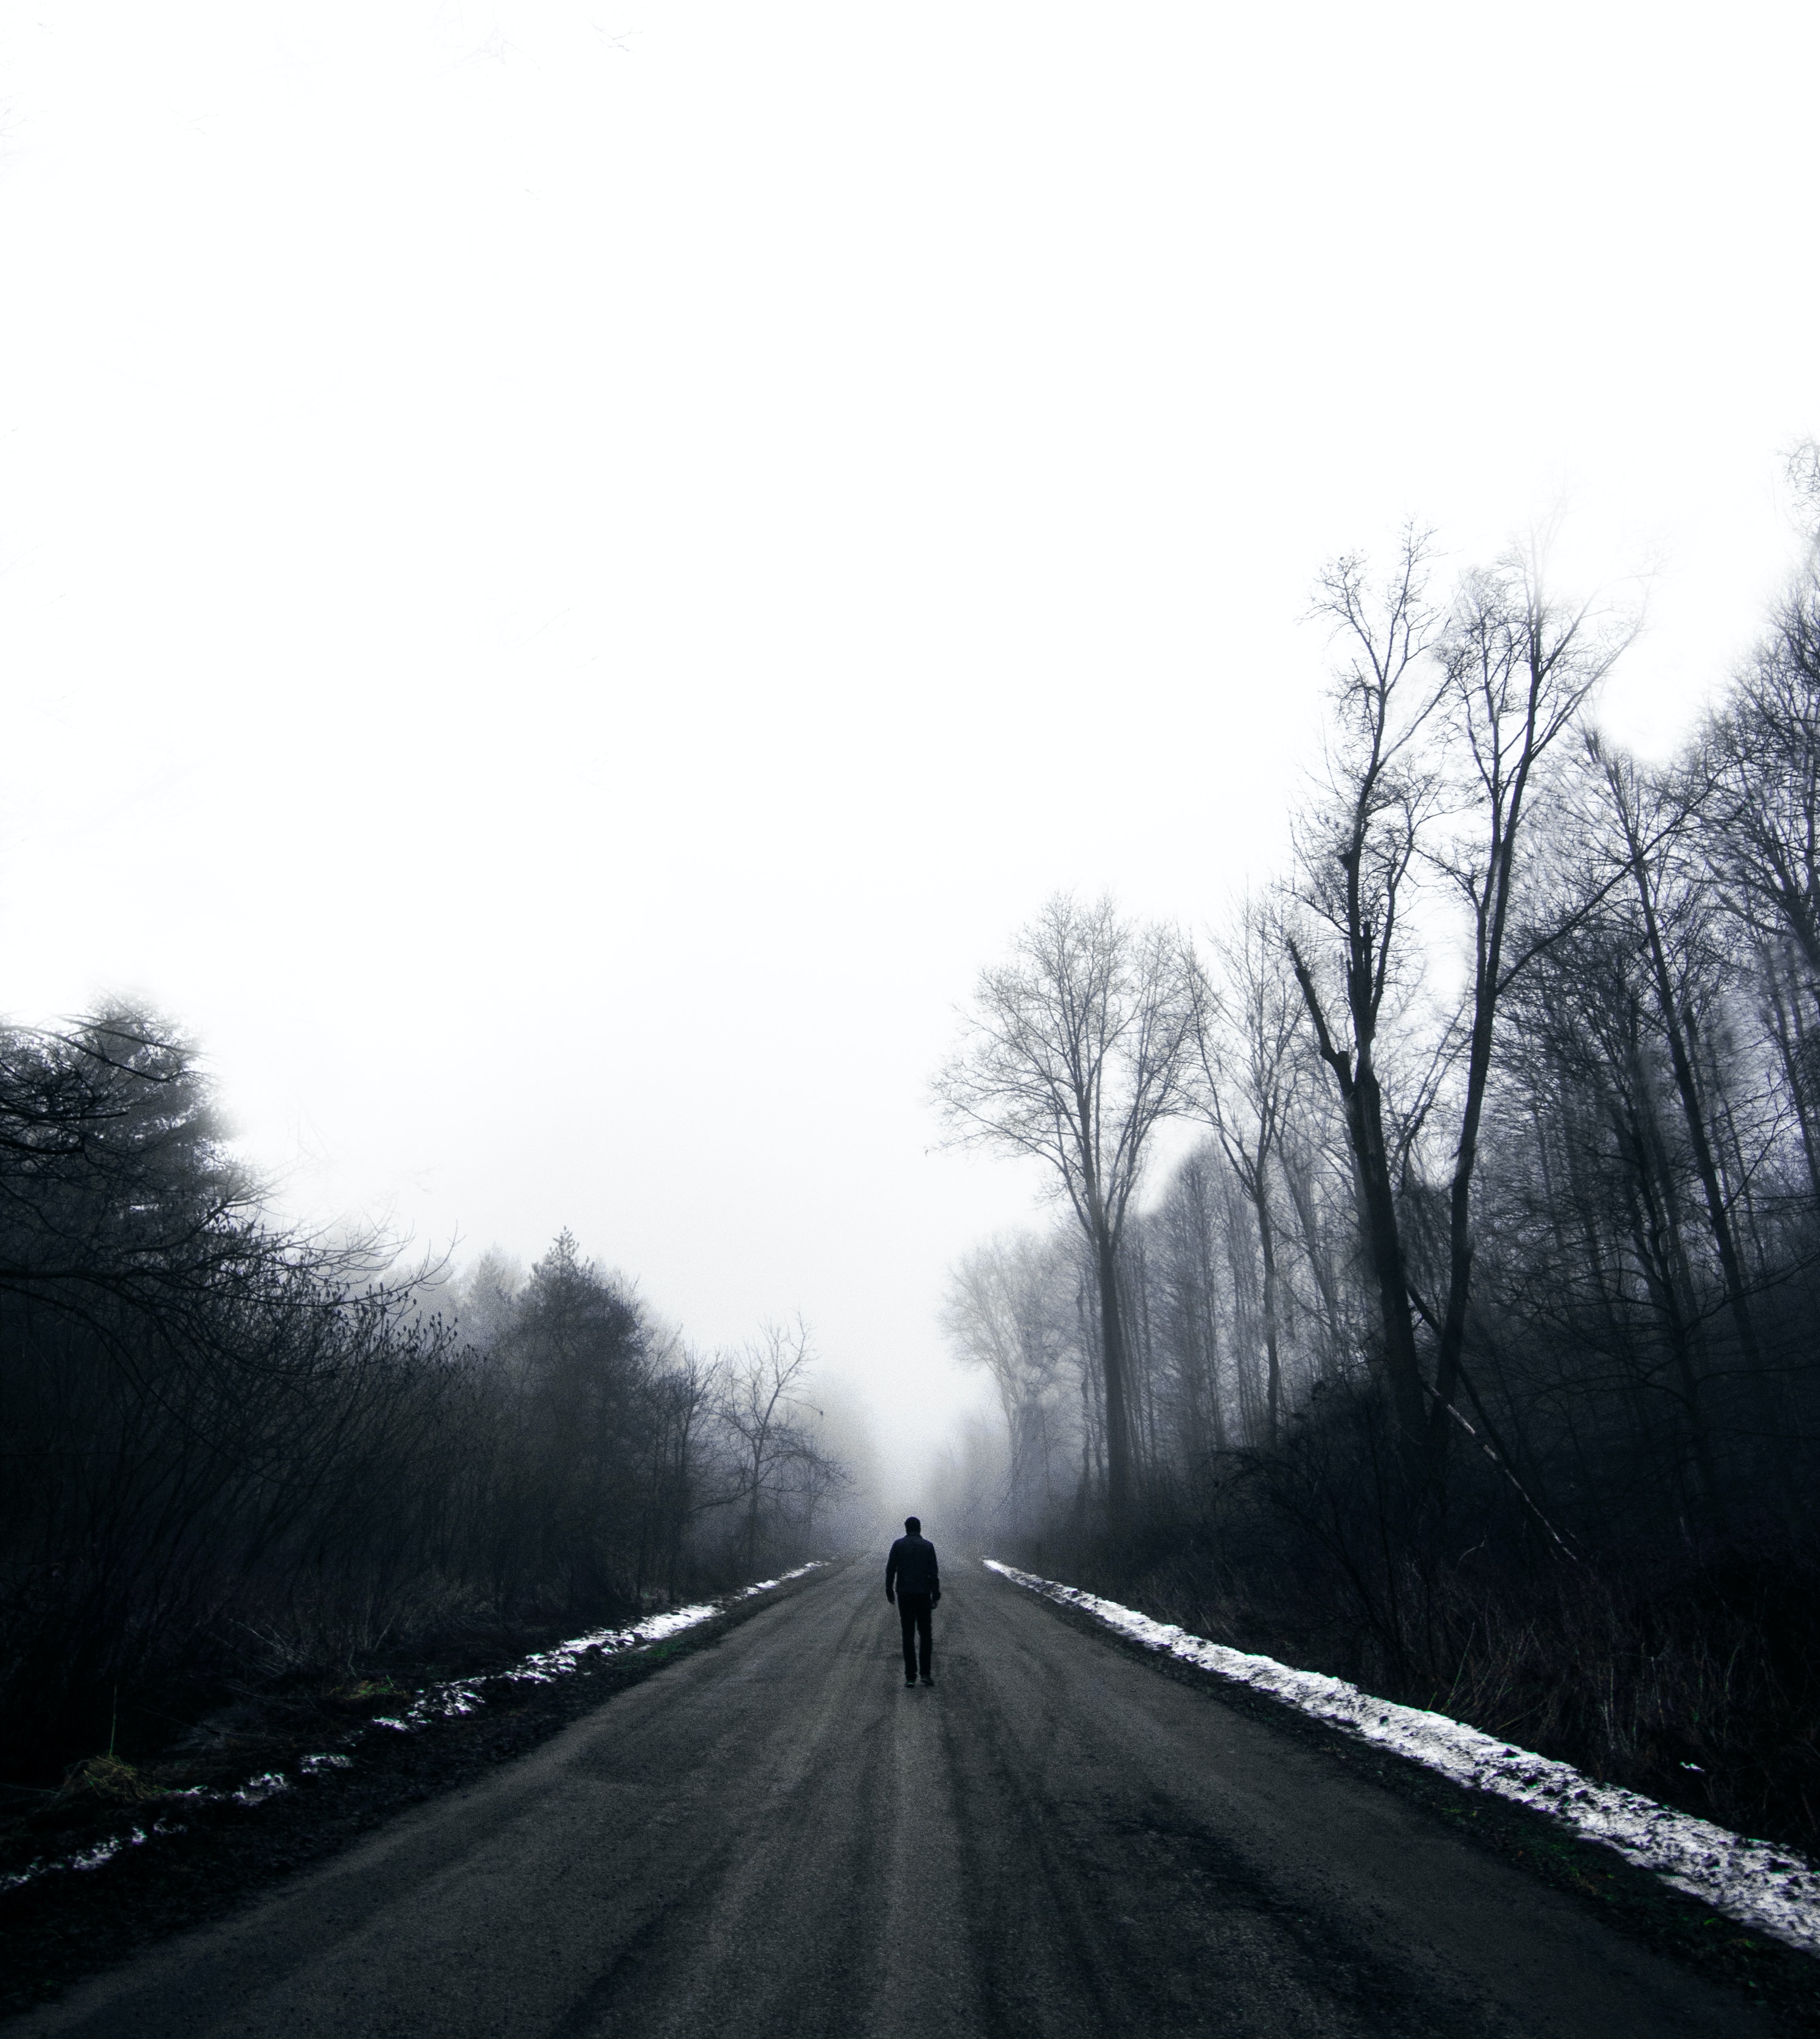 A black and white dreary winter scene of a person walking alone down an empty road away from the viewer into the distance